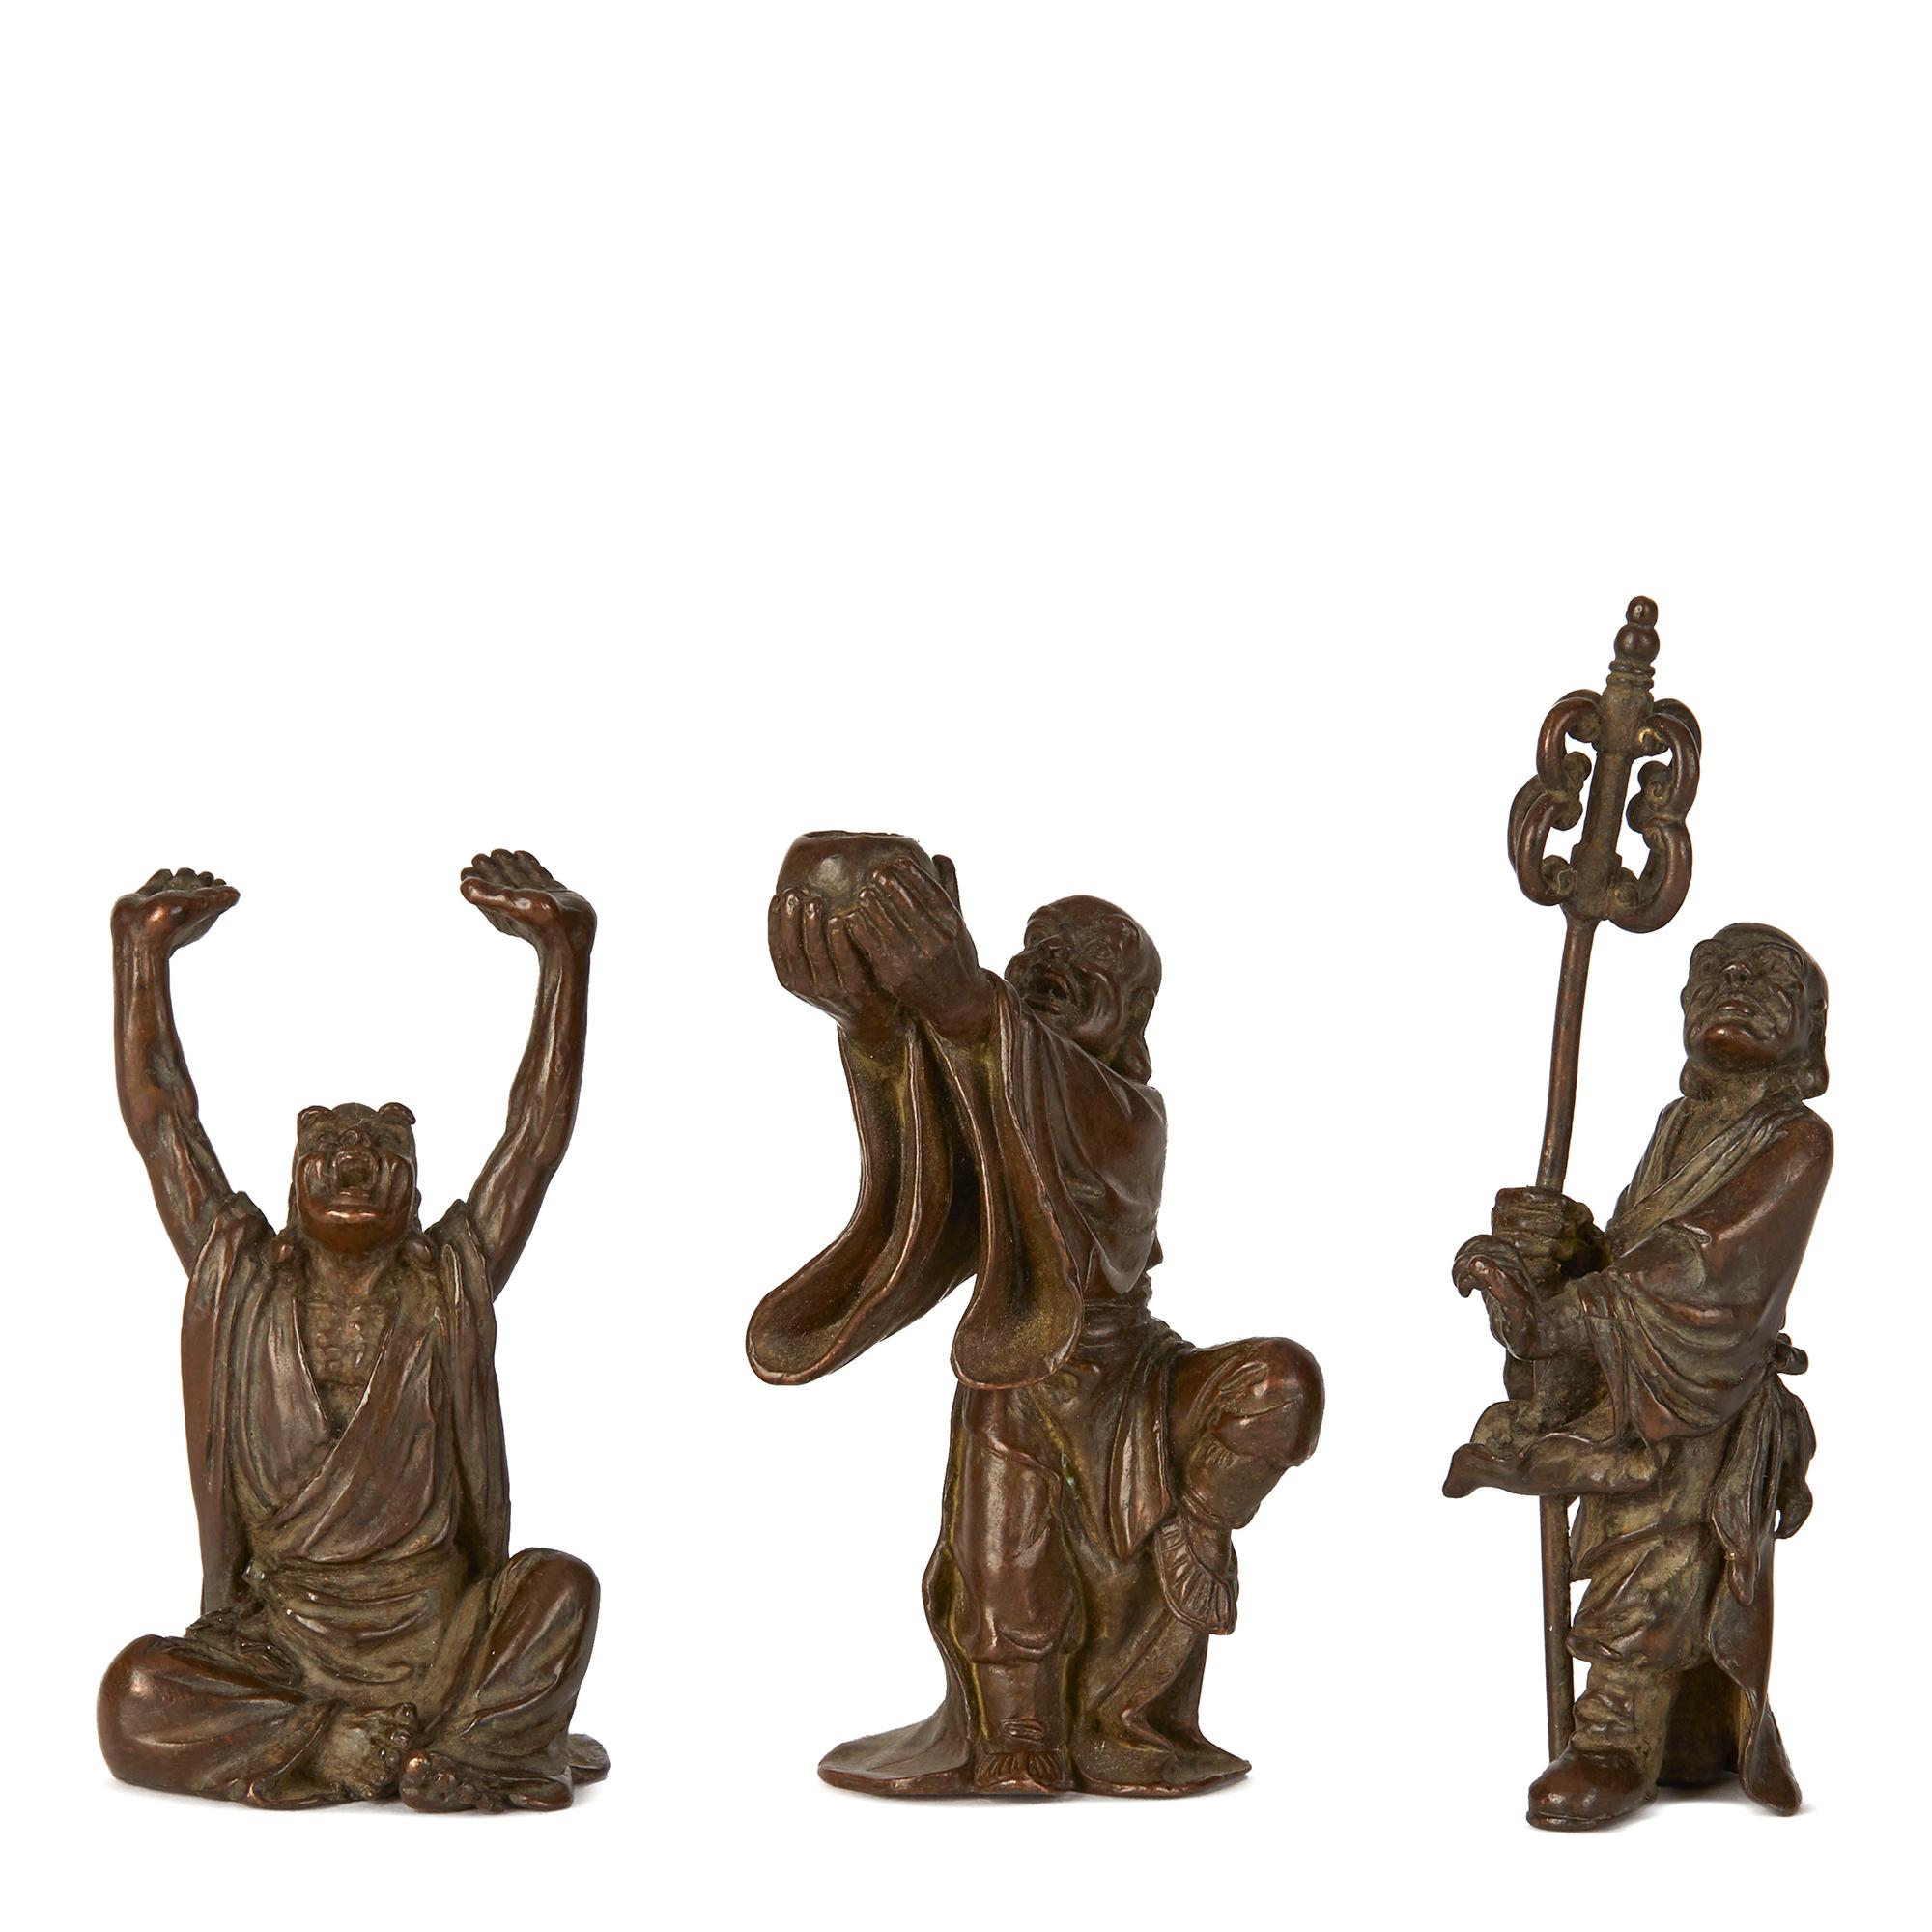 An extremely rare bronze collection of the eighteen (Archats) Luohan Disciples as adorned in Chinese Buddhist culture. The figures are exceptionally well made and represent the Luohan in their respective powers and these are generally presented in